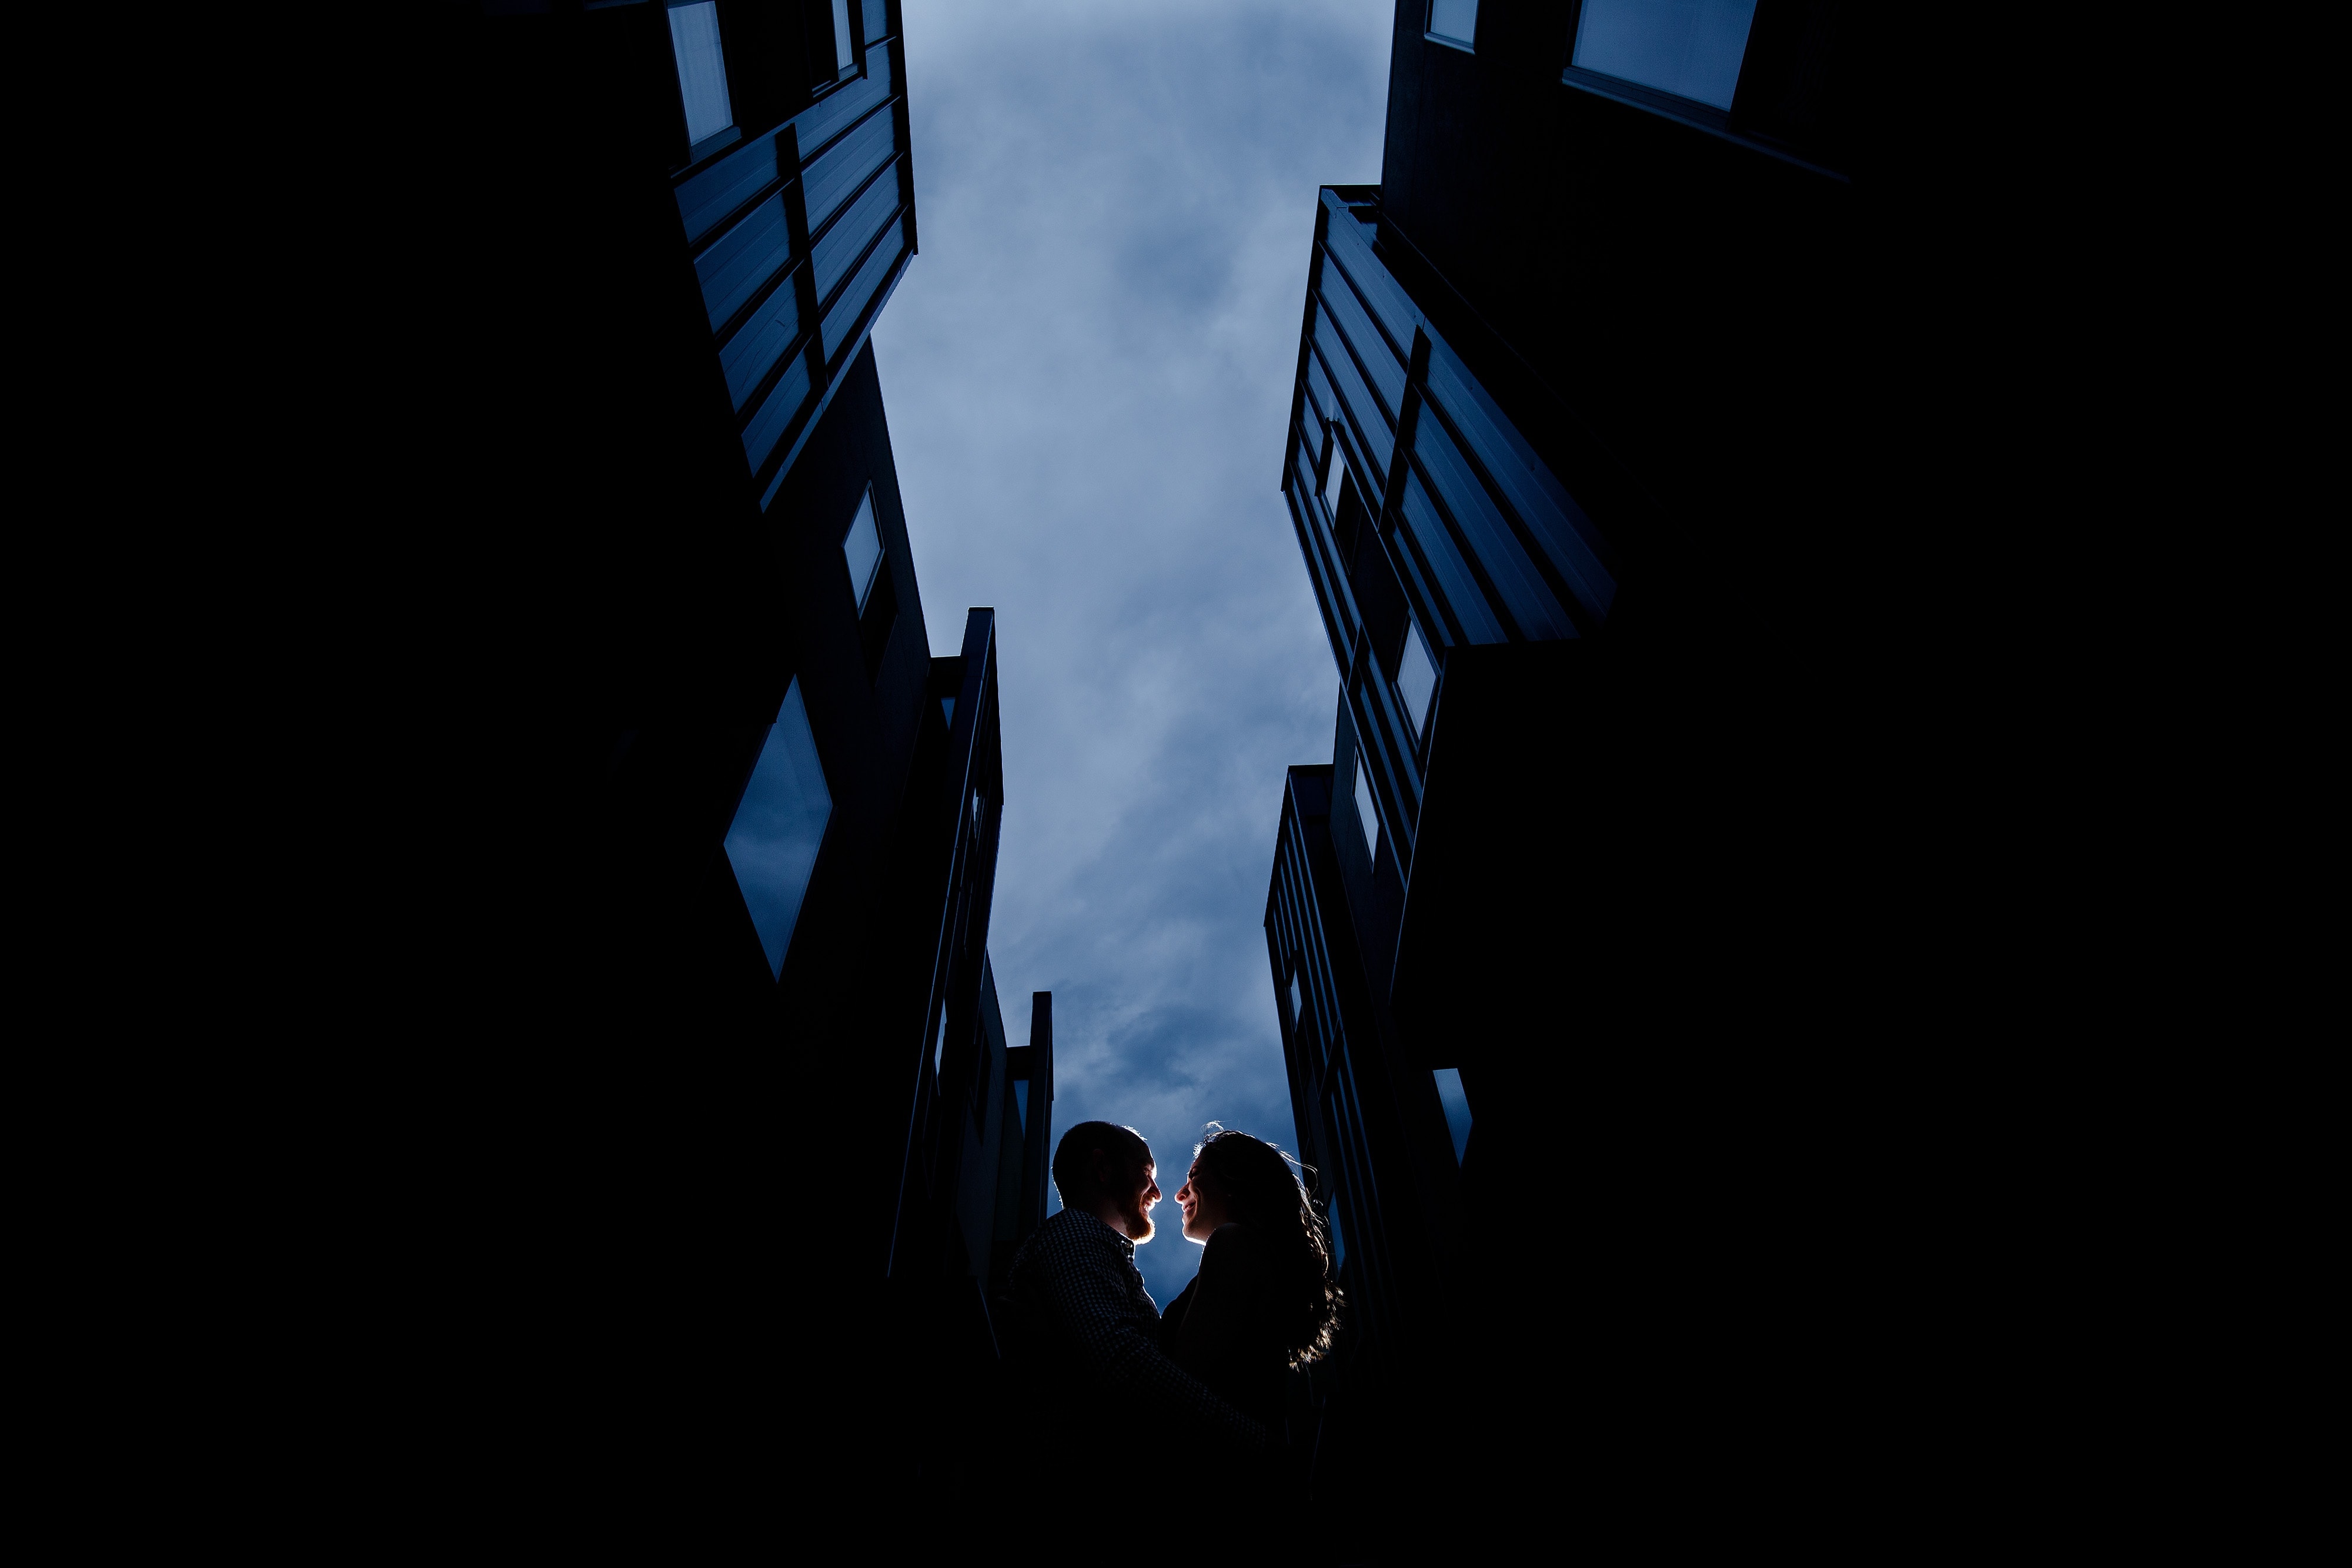 The couple is illuminated between condos in the Jefferson Park neighborhood of Denver during their engagement